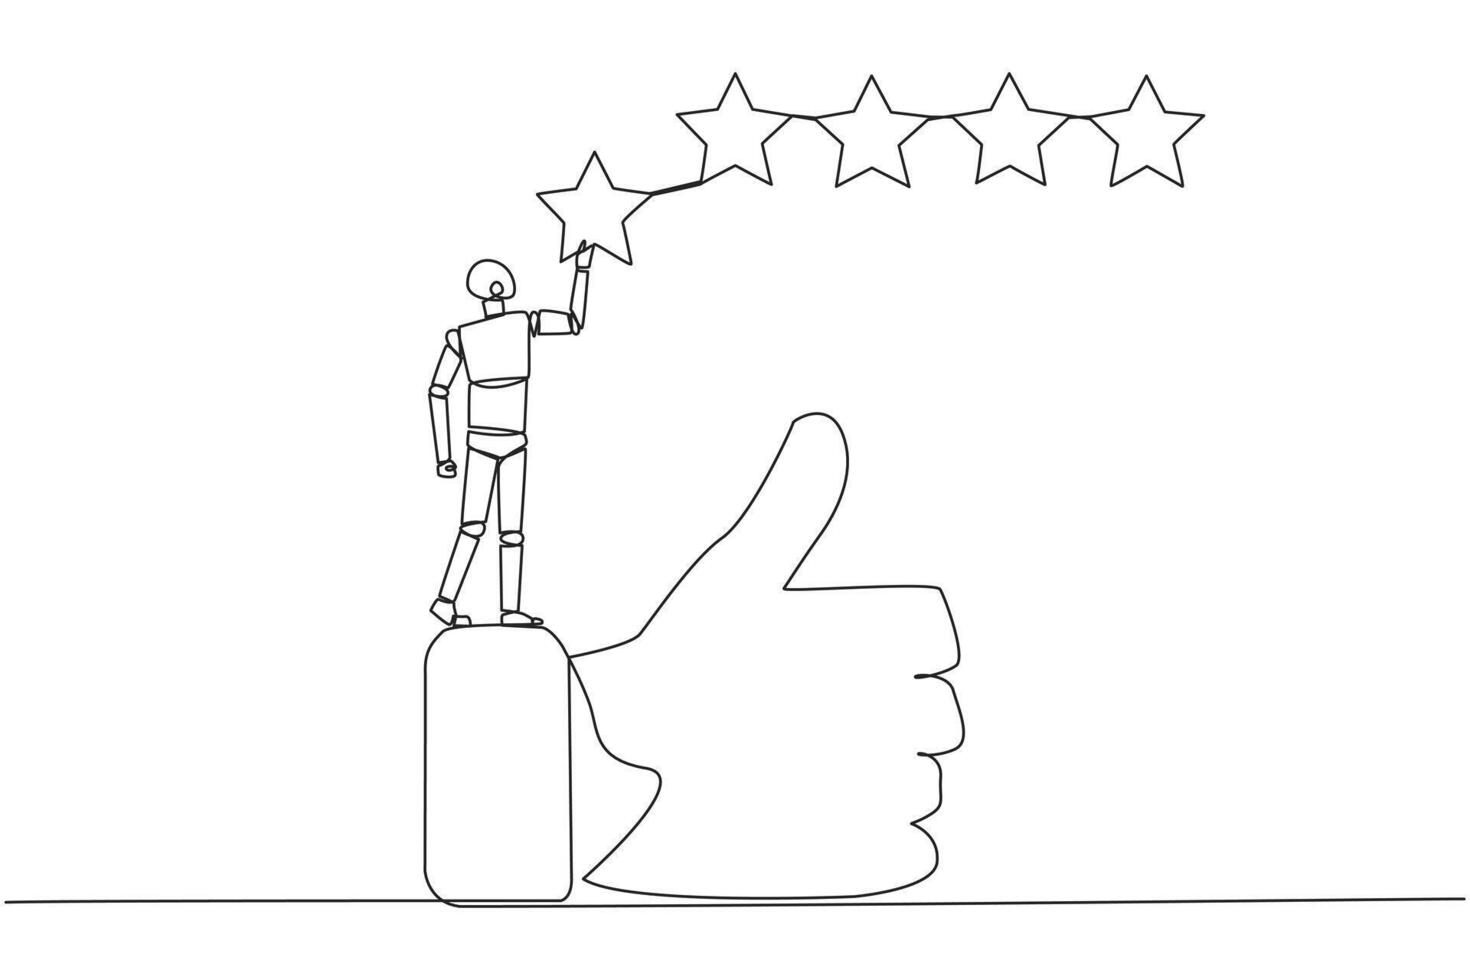 Single continuous line drawing robot standing on the thumbs up wants to attach the stars to form 5 stars in a row. Give review or good feedback. Artificial intelligence. One line vector illustration